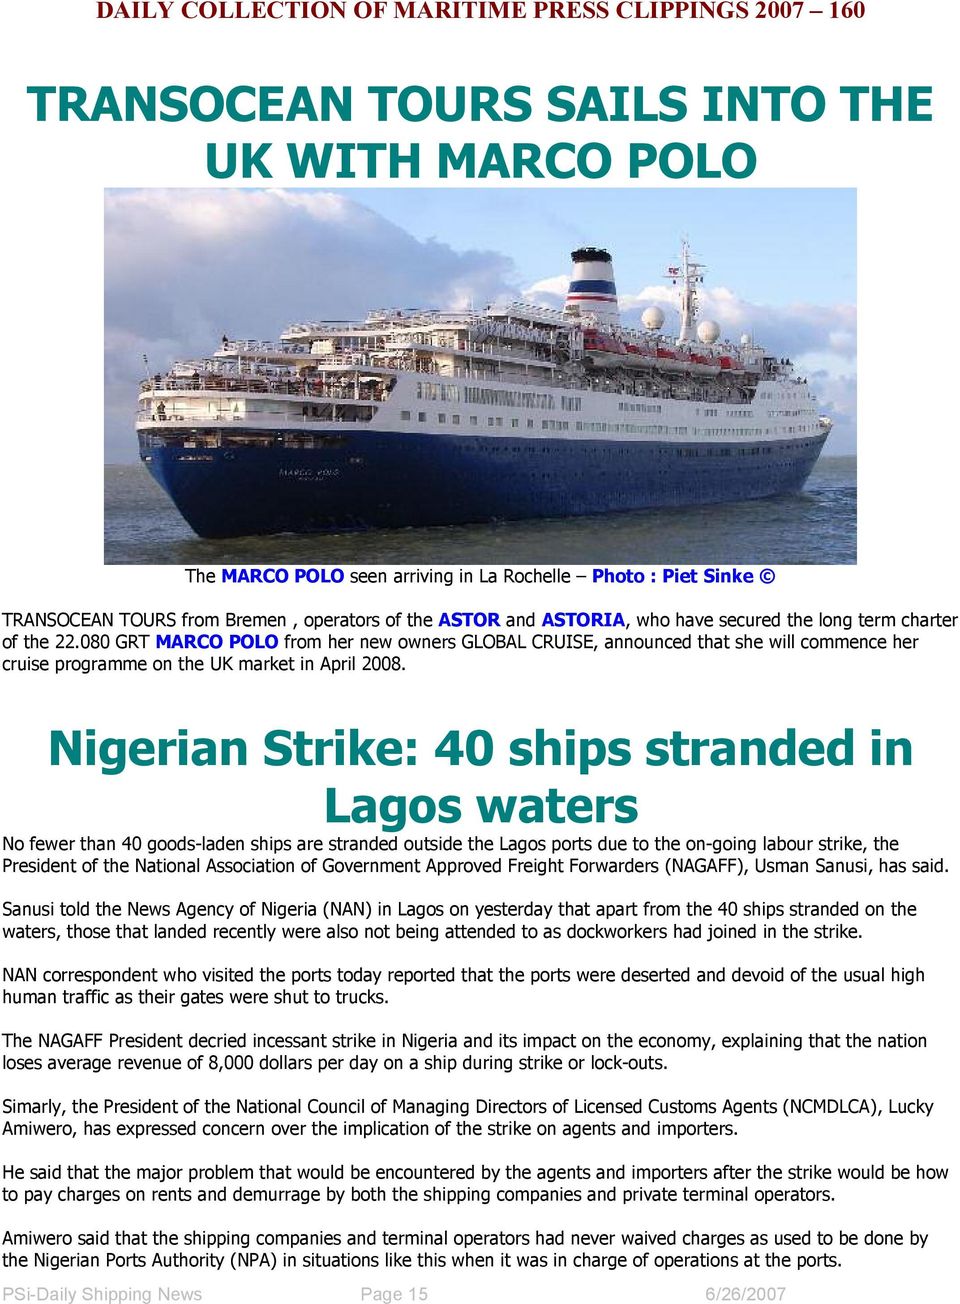 Nigerian Strike: 40 ships stranded in Lagos waters No fewer than 40 goods-laden ships are stranded outside the Lagos ports due to the on-going labour strike, the President of the National Association